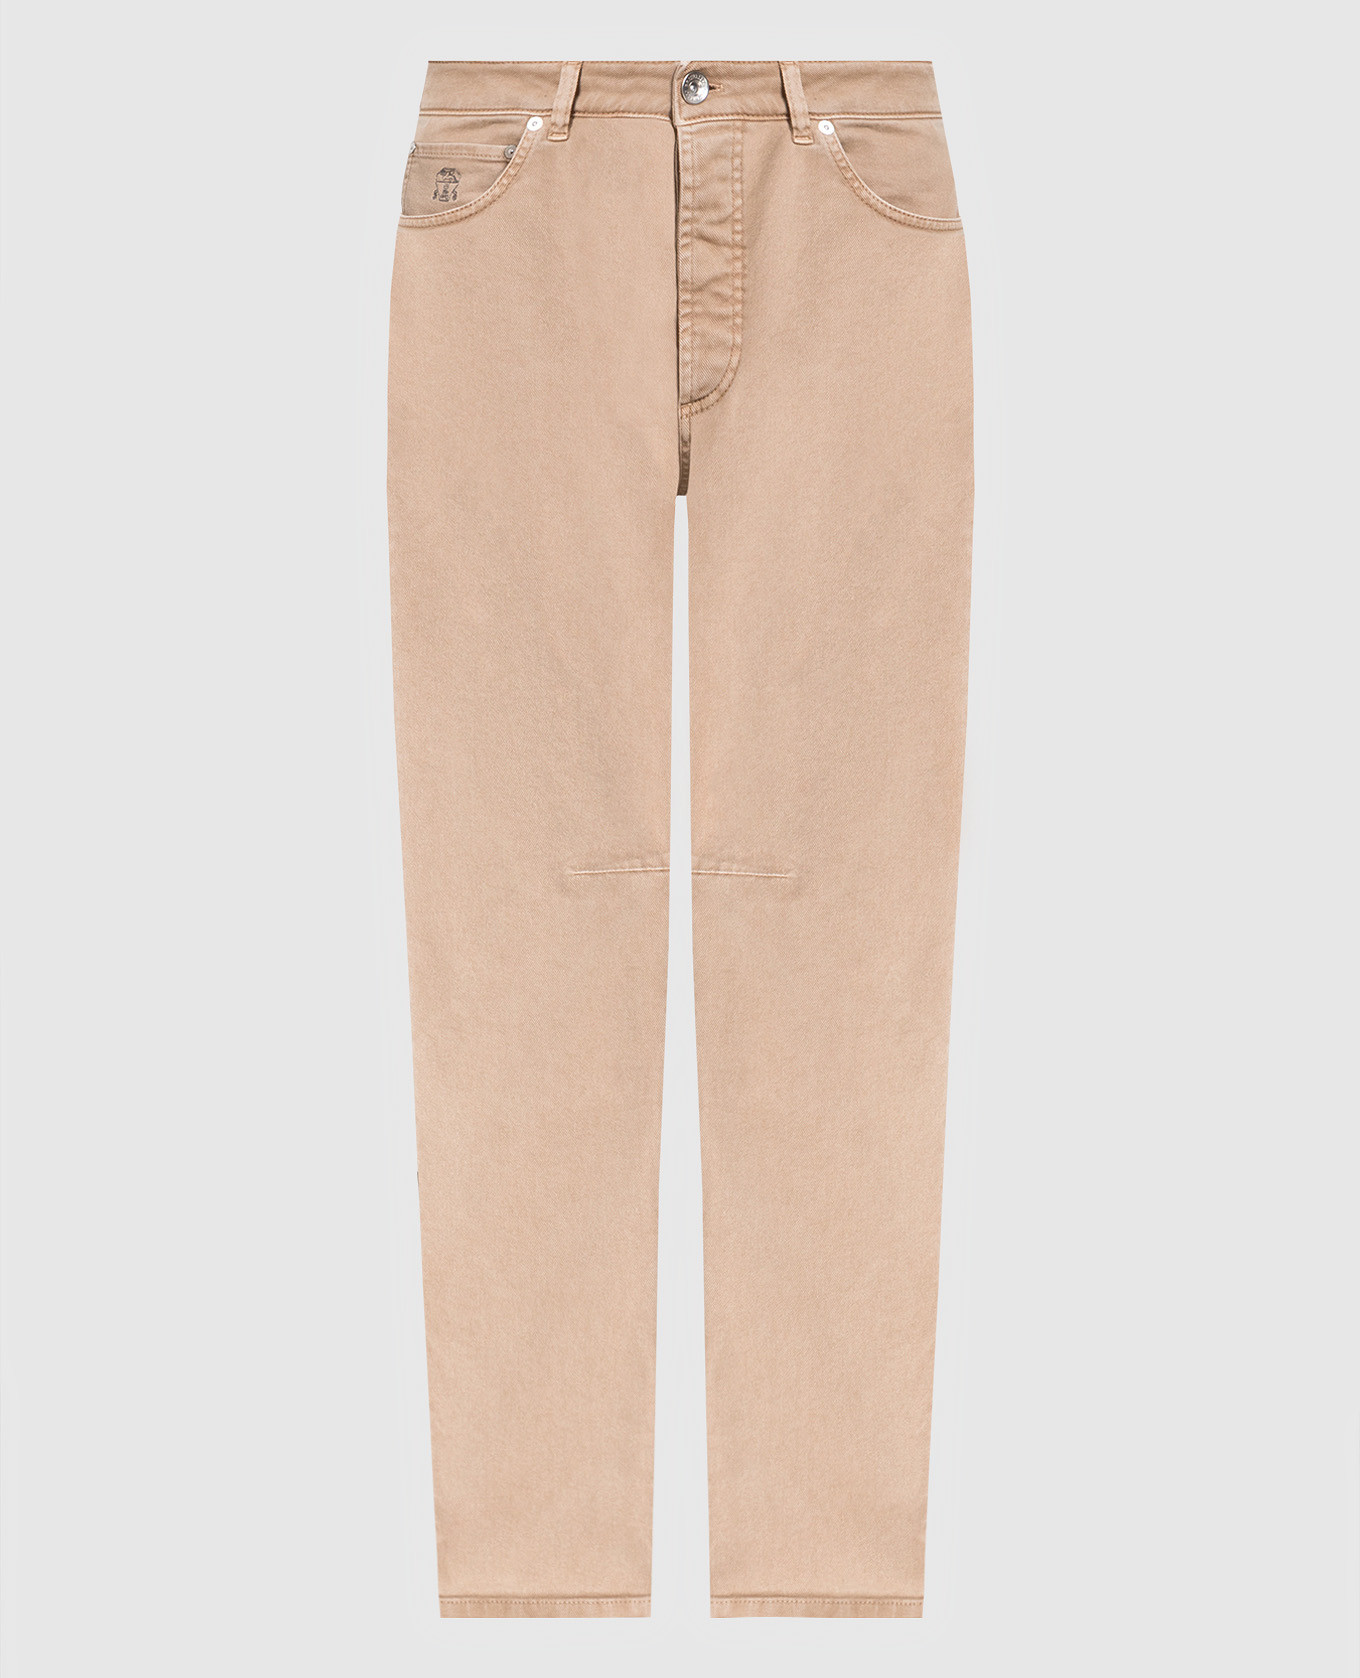 Beige jeans with logo